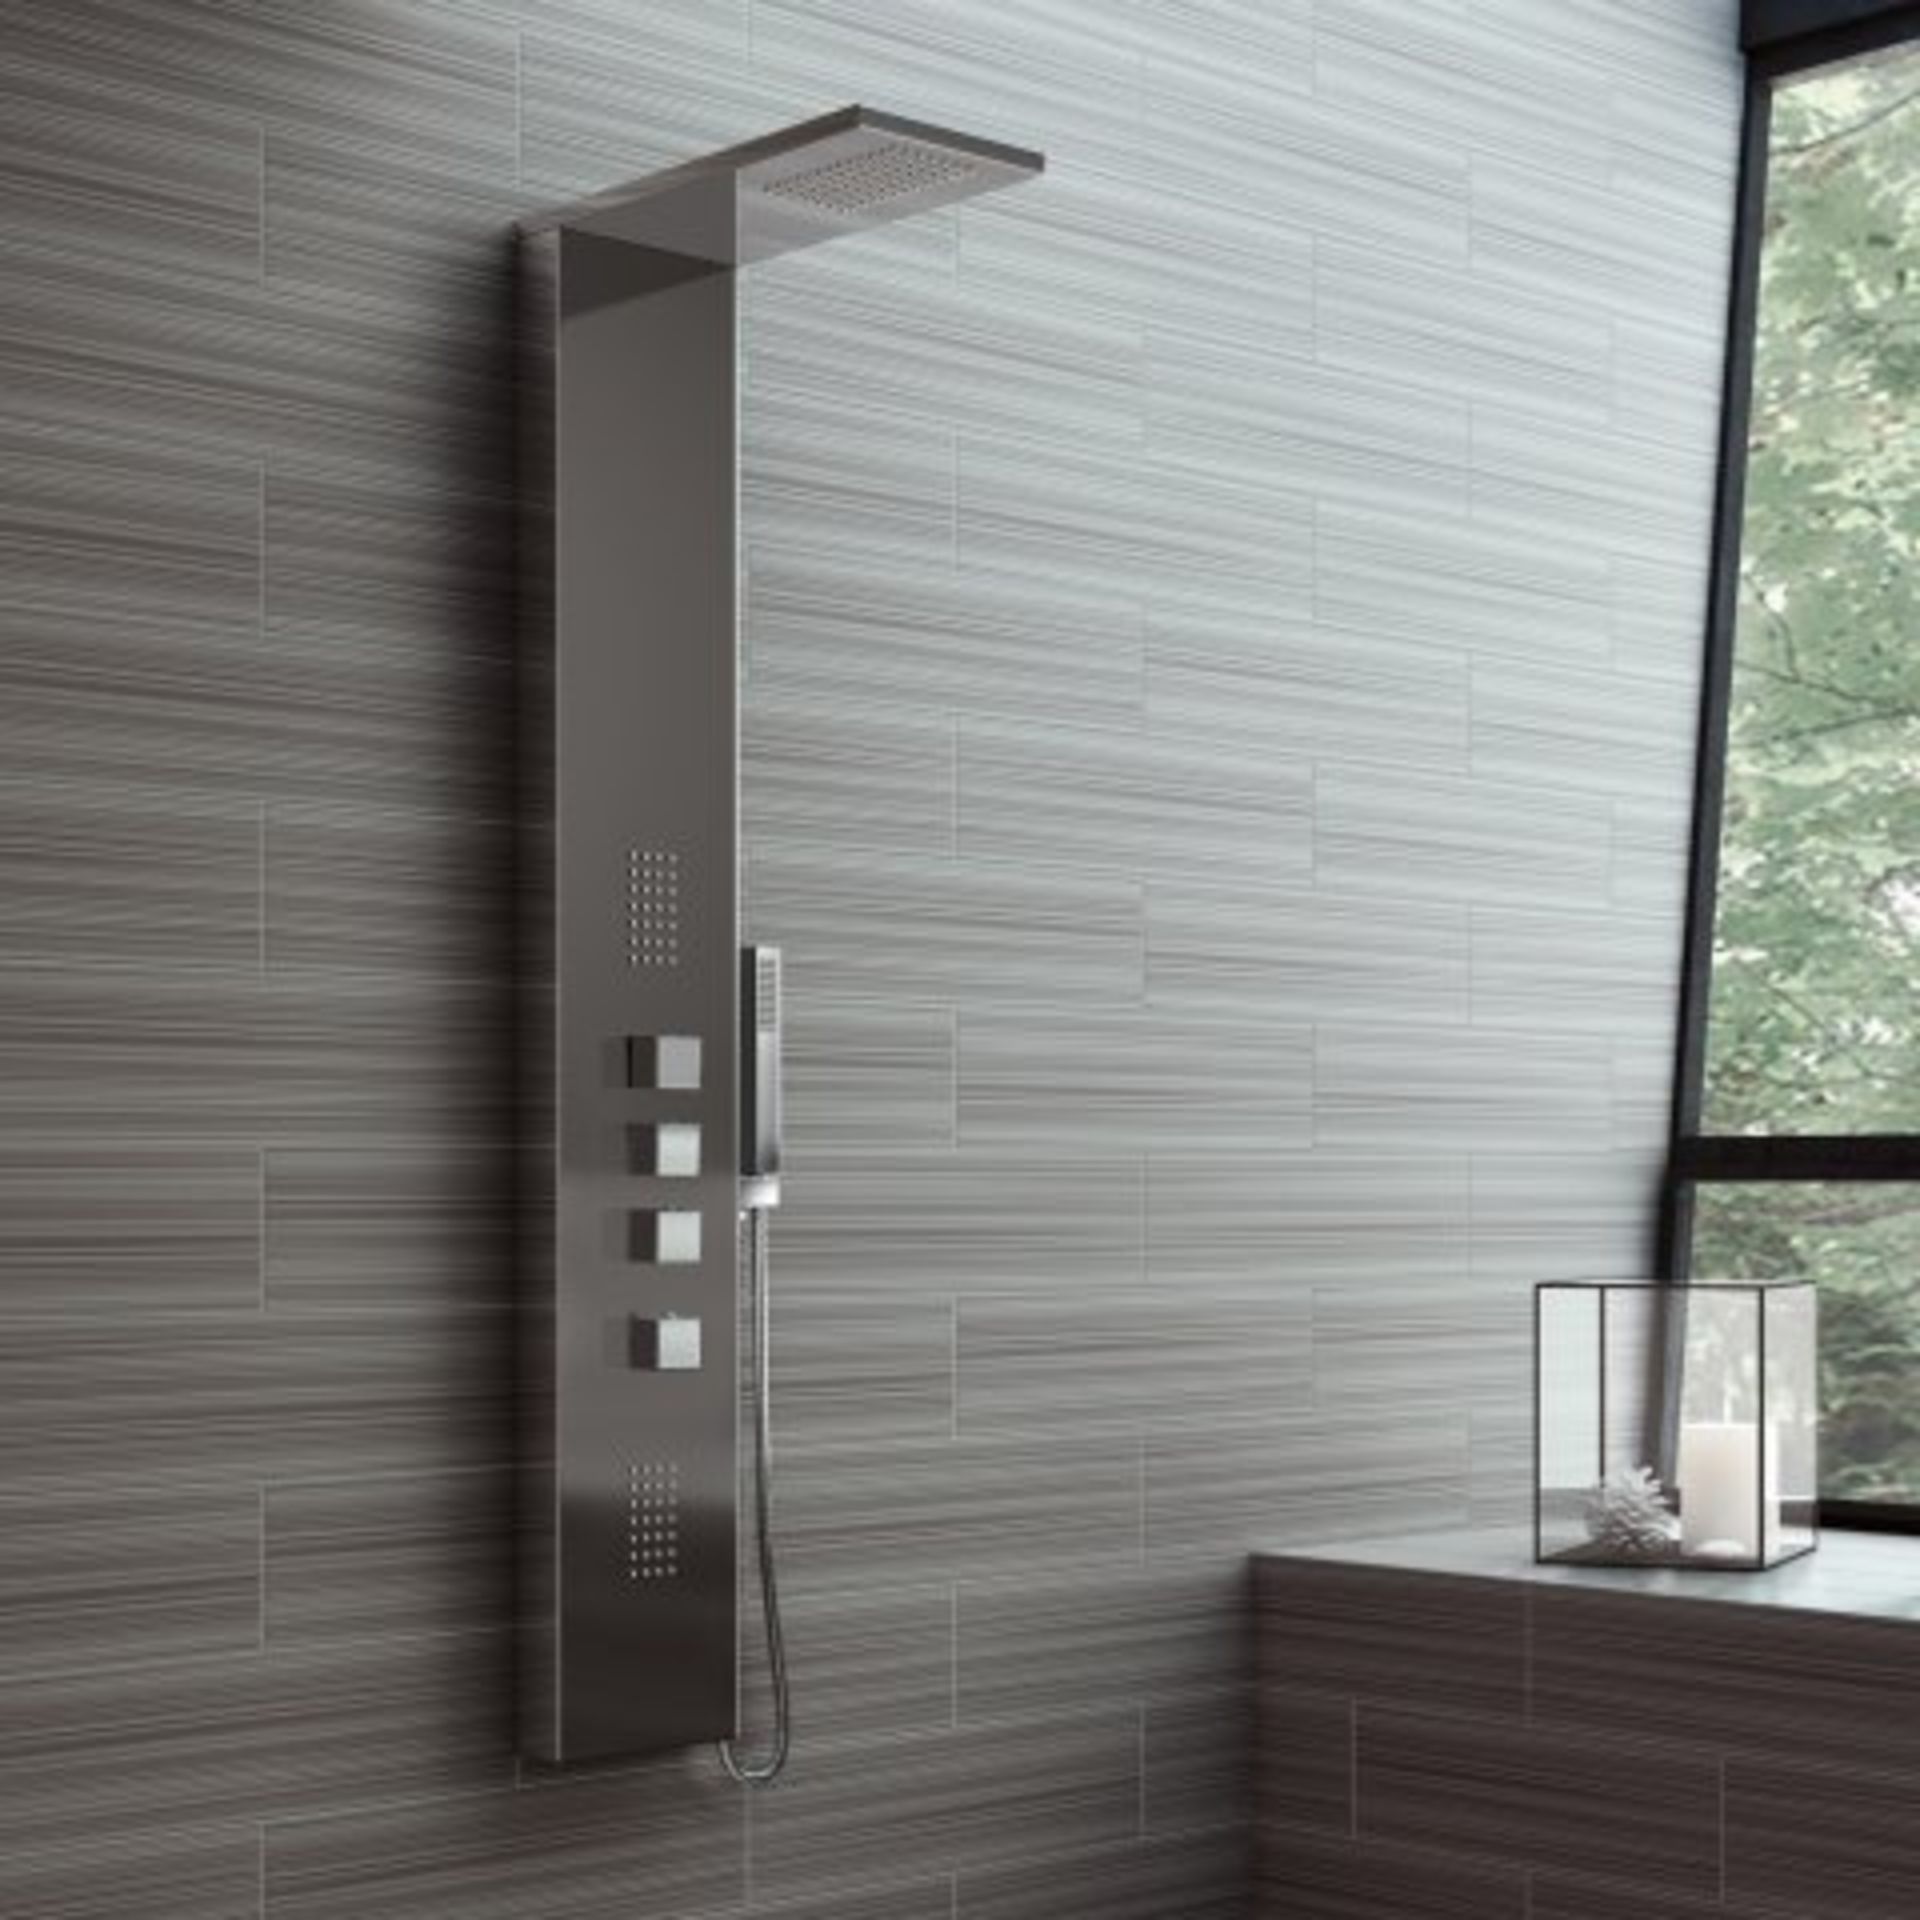 (Z4) Black Shower Panel Tower & Luxury Body Jets. RRP £499.99. Feel inspired with our premium shower